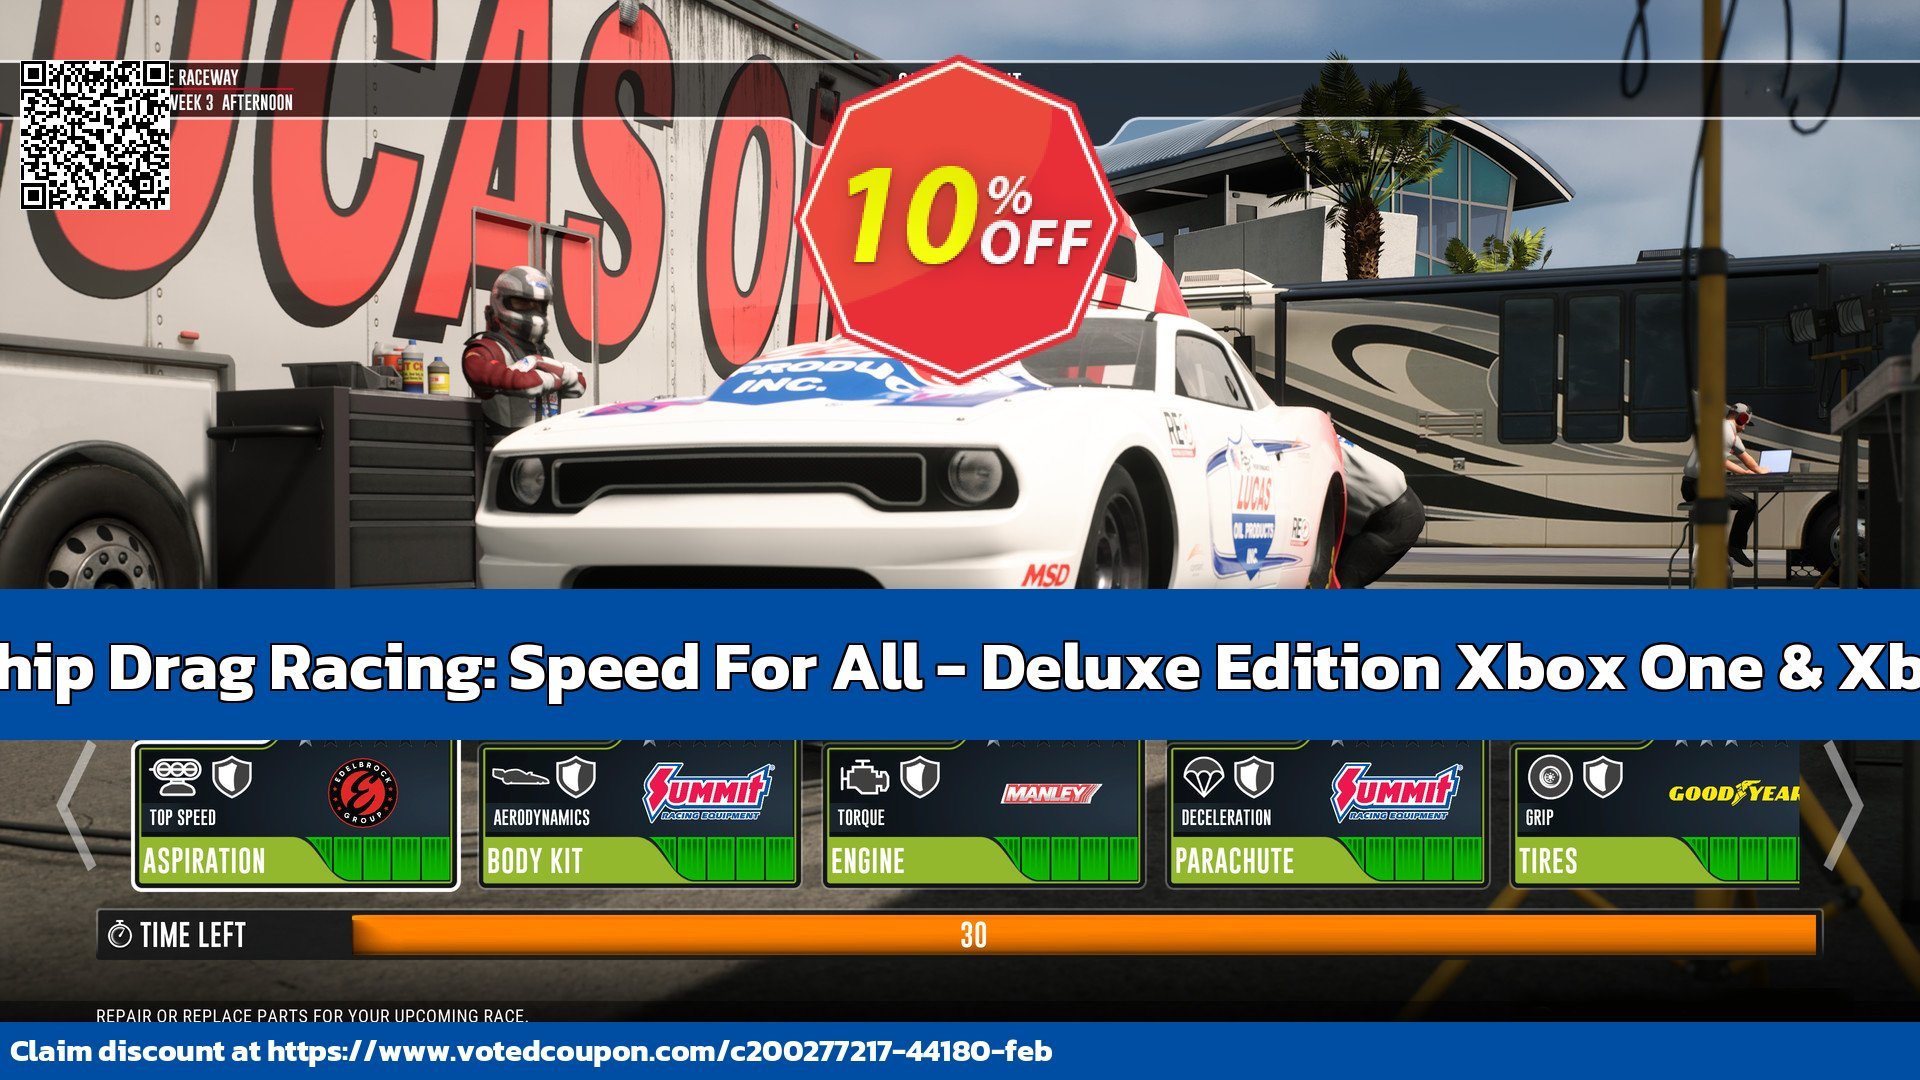 NHRA Championship Drag Racing: Speed For All - Deluxe Edition Xbox One & Xbox Series X|S, US  Coupon Code May 2024, 10% OFF - VotedCoupon